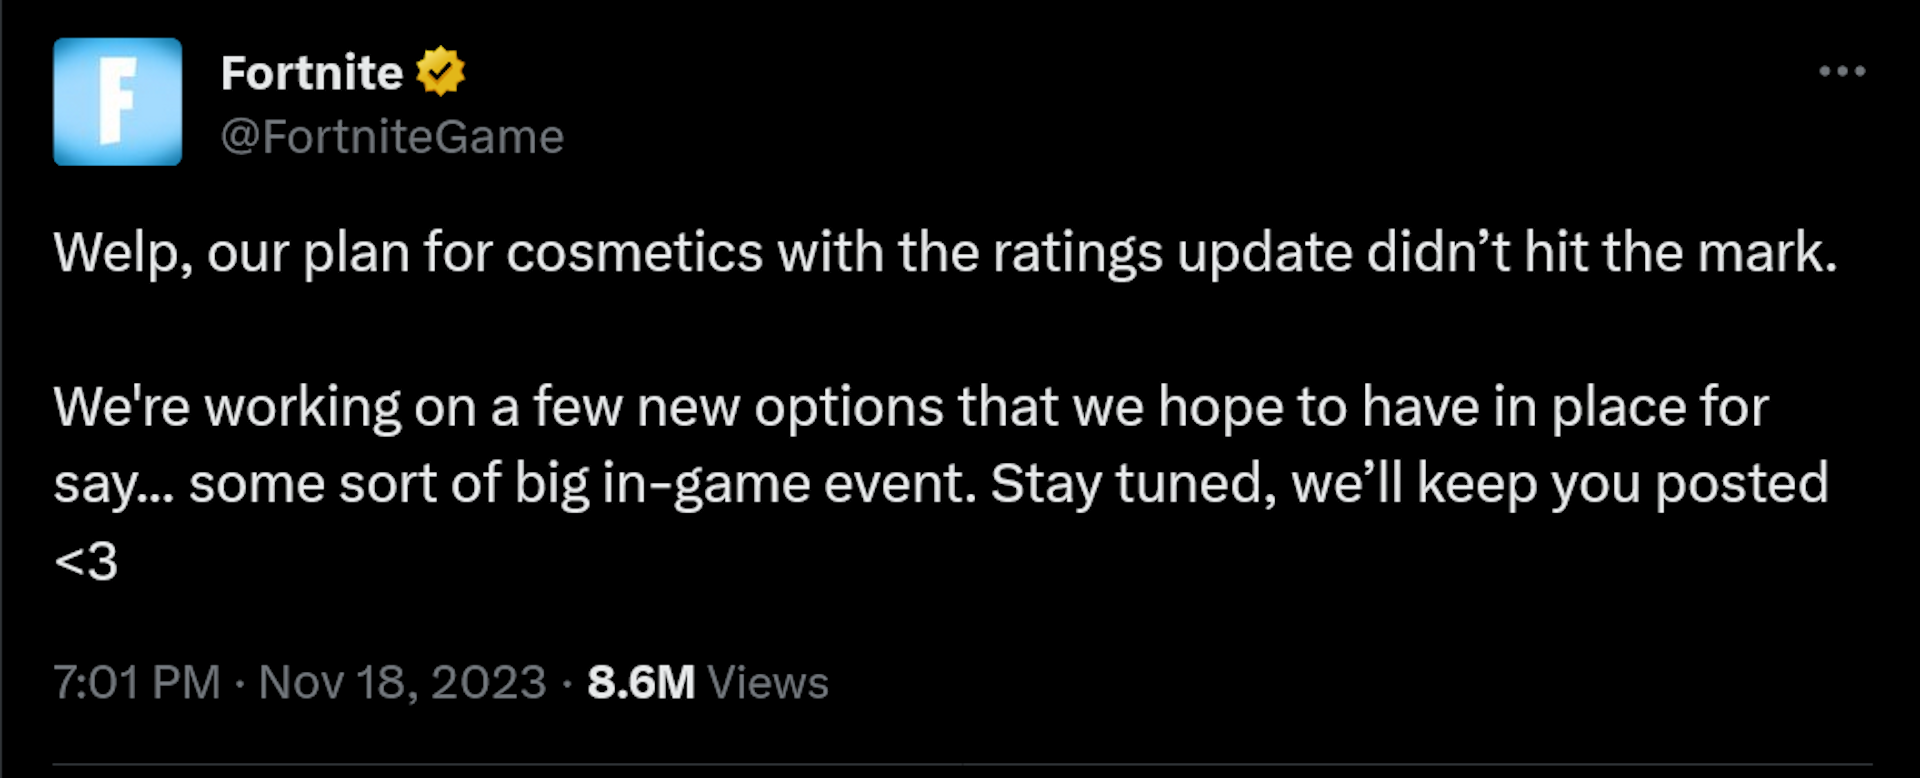 Welp, our plan for cosmetics with the ratings update didn’t hit the mark.  We're working on a few new options that we hope to have in place for say... some sort of big in-game event. Stay tuned, we’ll keep you posted <3